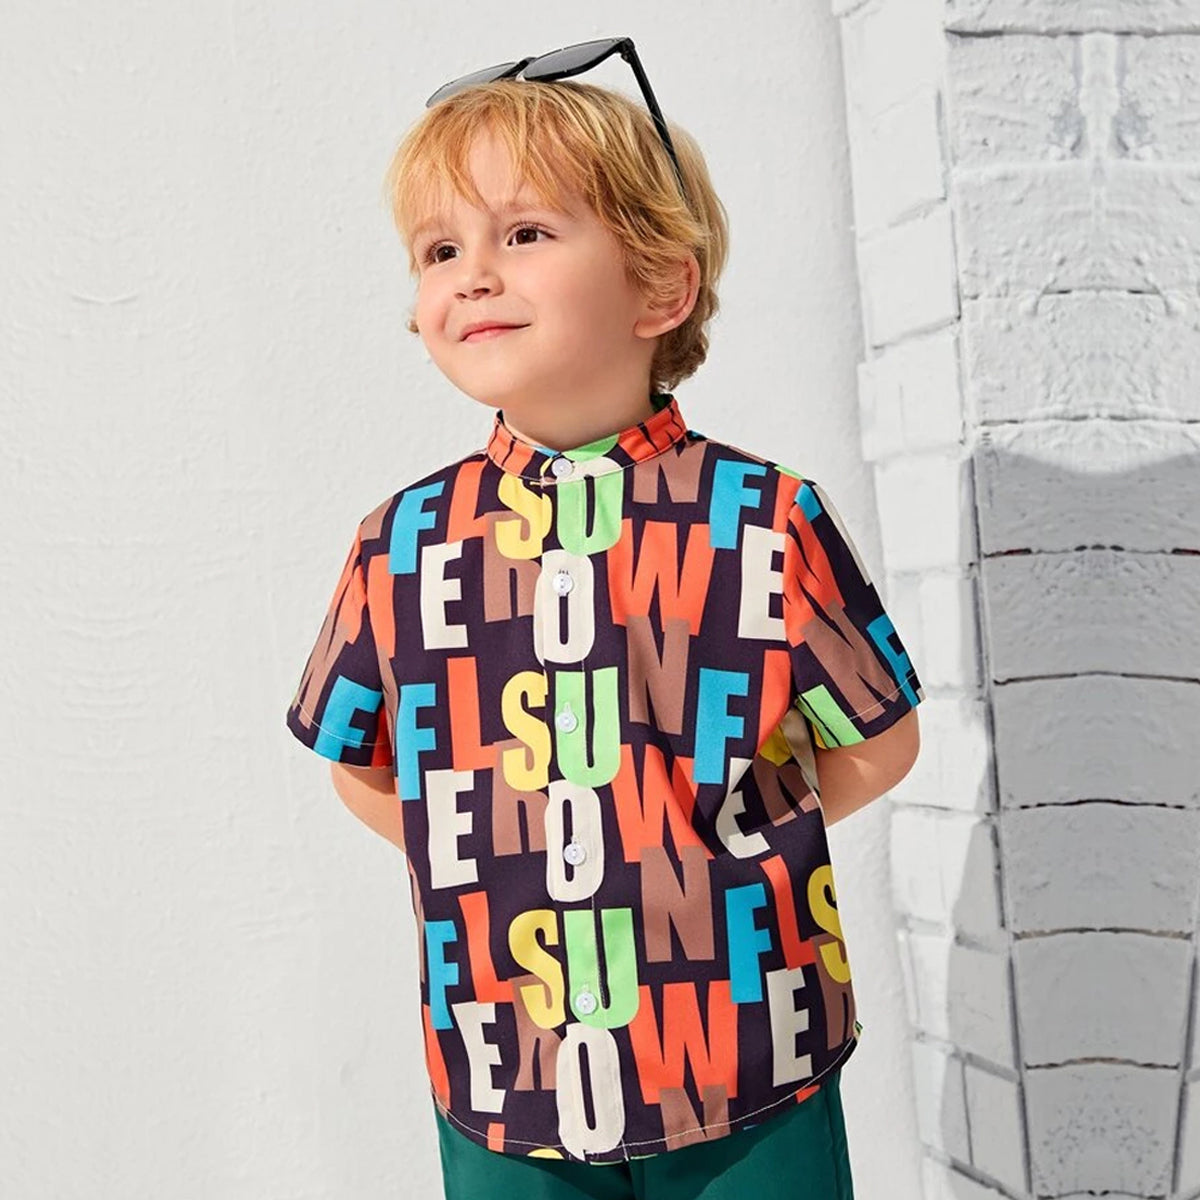 Venutaloza Boy's Stylish Cool Looking Colorful Graphic Designer Button Front (Combo pack For 4) Shirt For Boy.